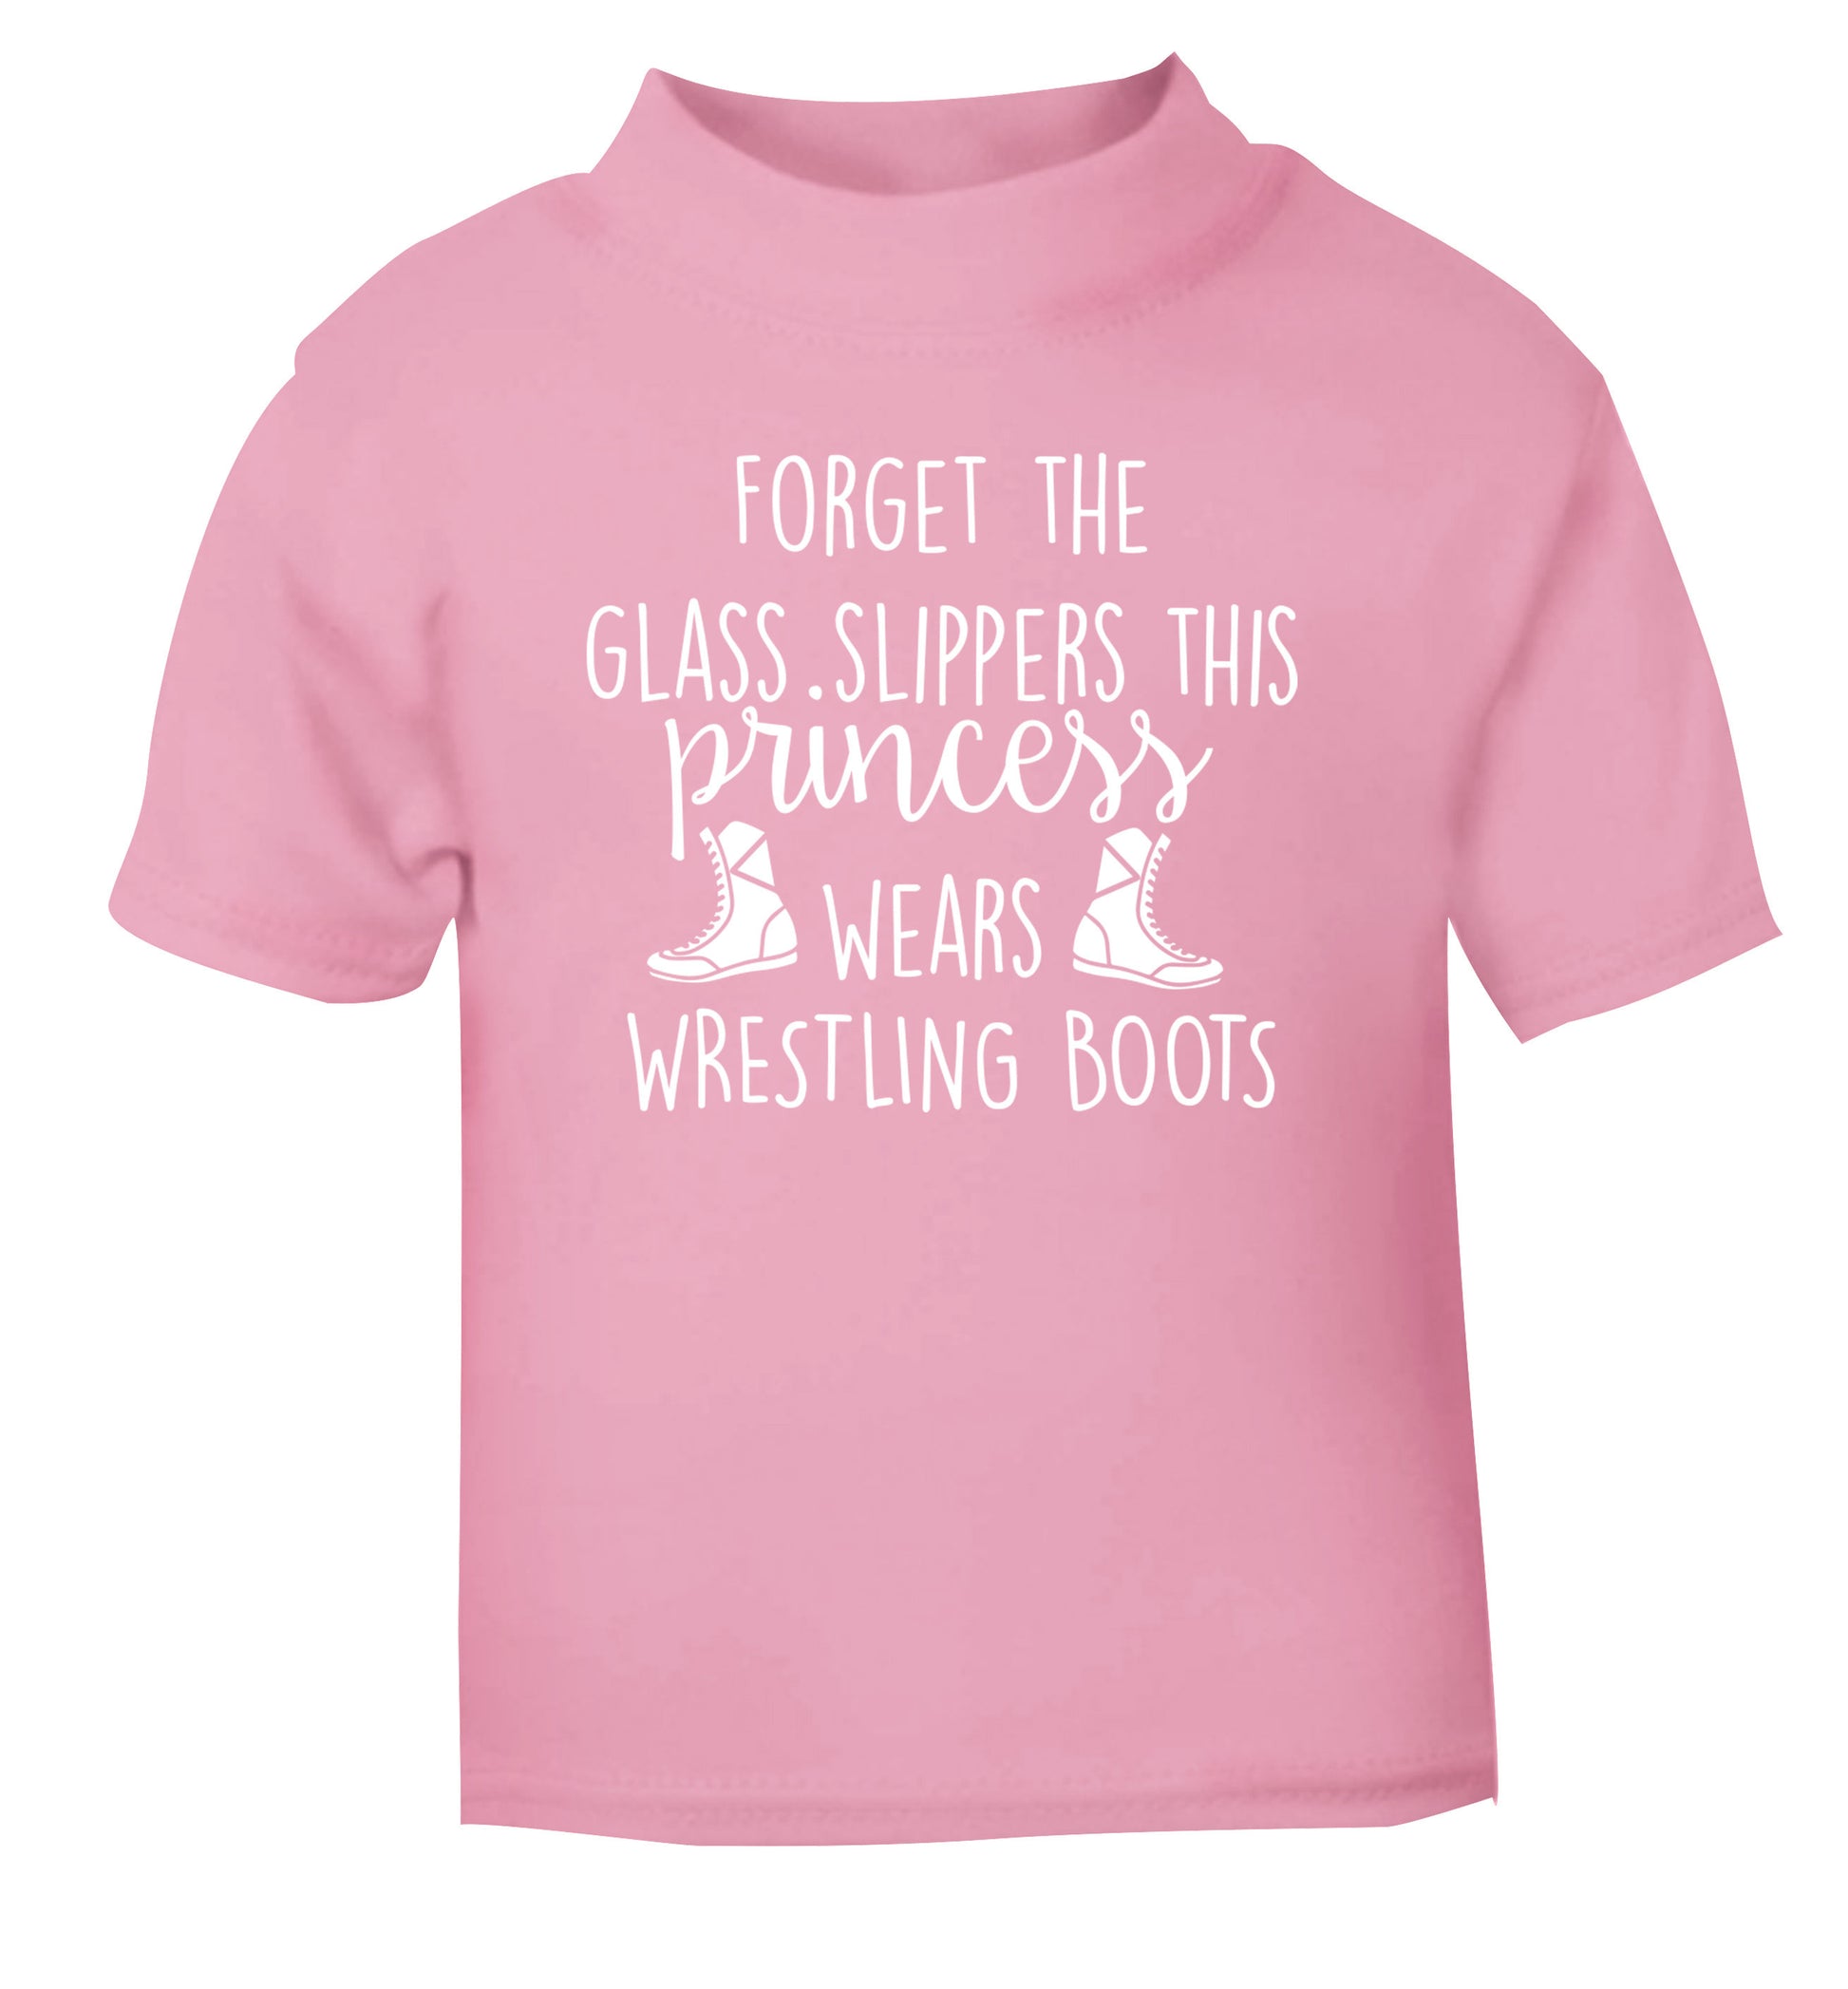 Forget the glass slippers this princess wears wrestling boots light pink Baby Toddler Tshirt 2 Years